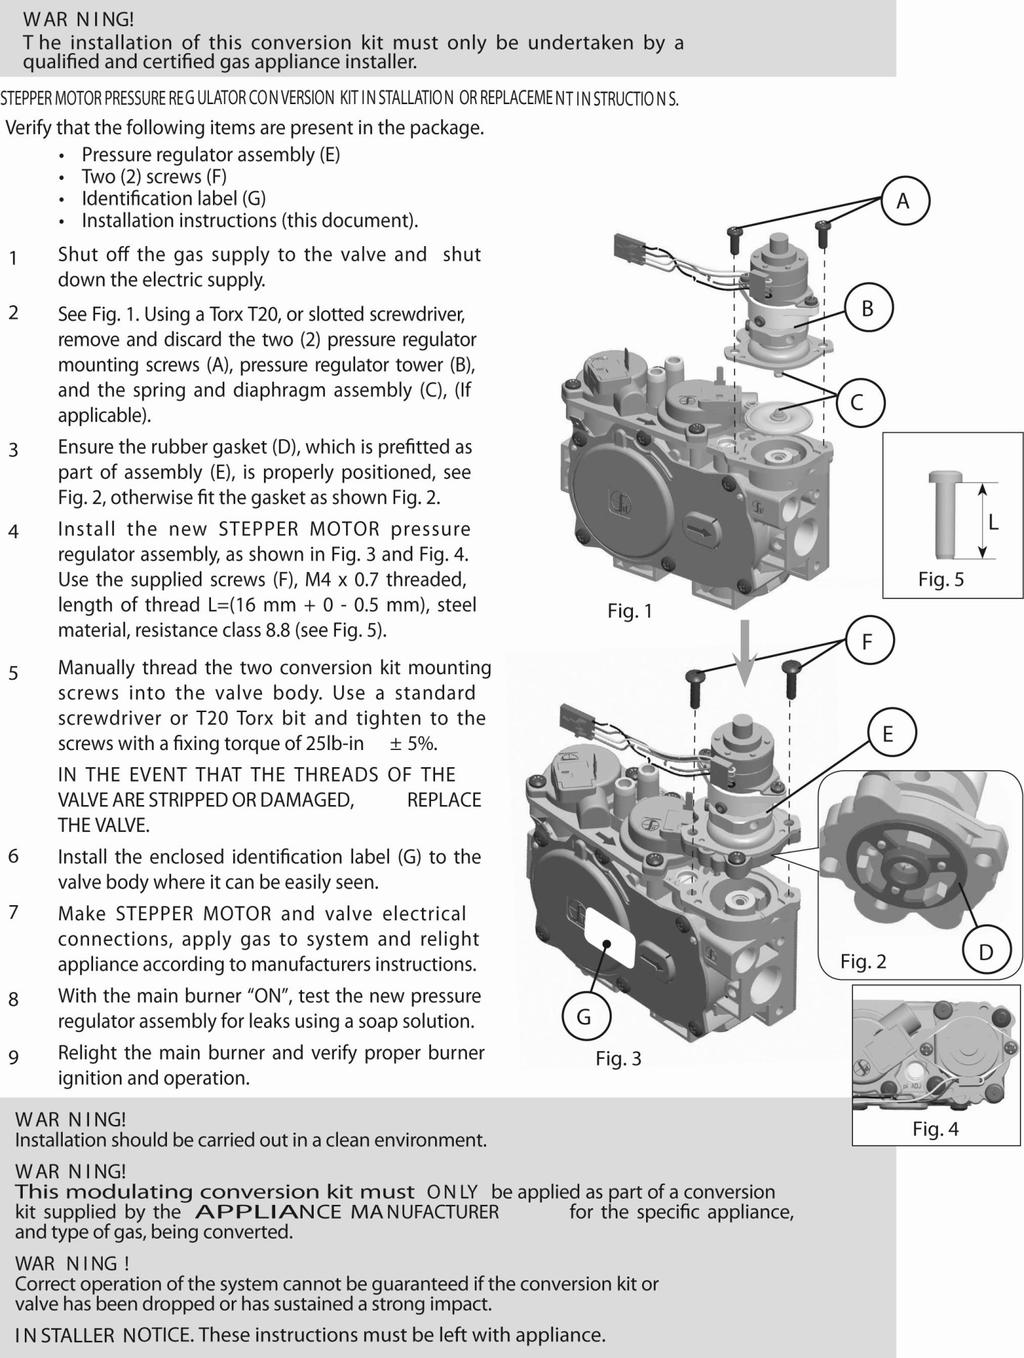 LPG PRESSURE REGULATOR CONVERSION INSTRUCTIONS WARNING: Failure to position the parts in accordance with these diagrams or failure to use only parts specifically approved with this appliance may